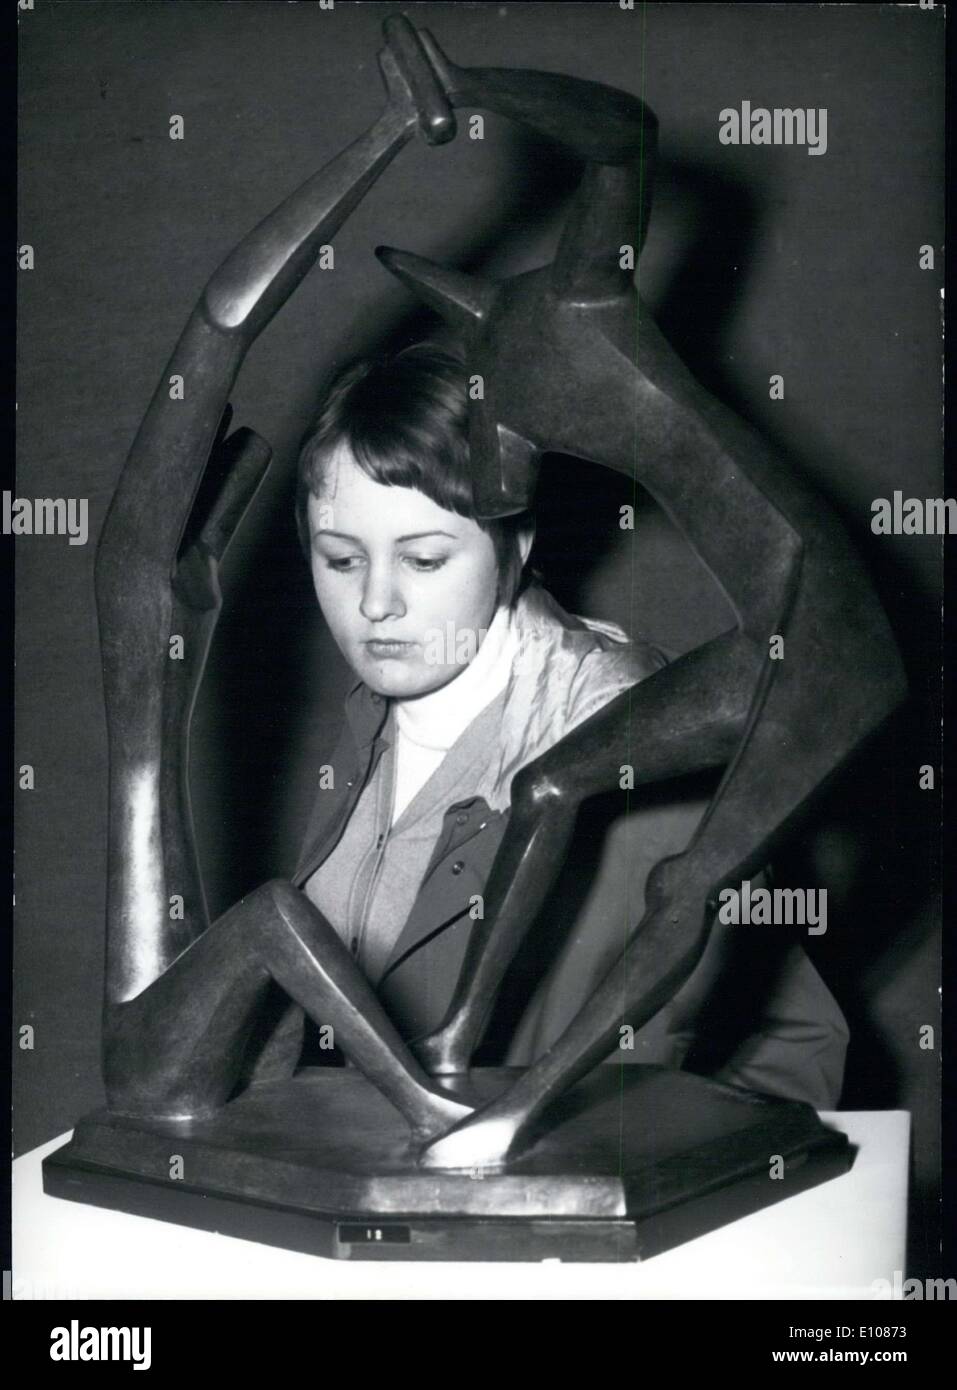 Feb. 28, 1970 - Pictured here is the work entitled ''Tanz'' by Russian artist Alexander Archipenko. It was one of many at an exhibition of his work in Munich. Stock Photo